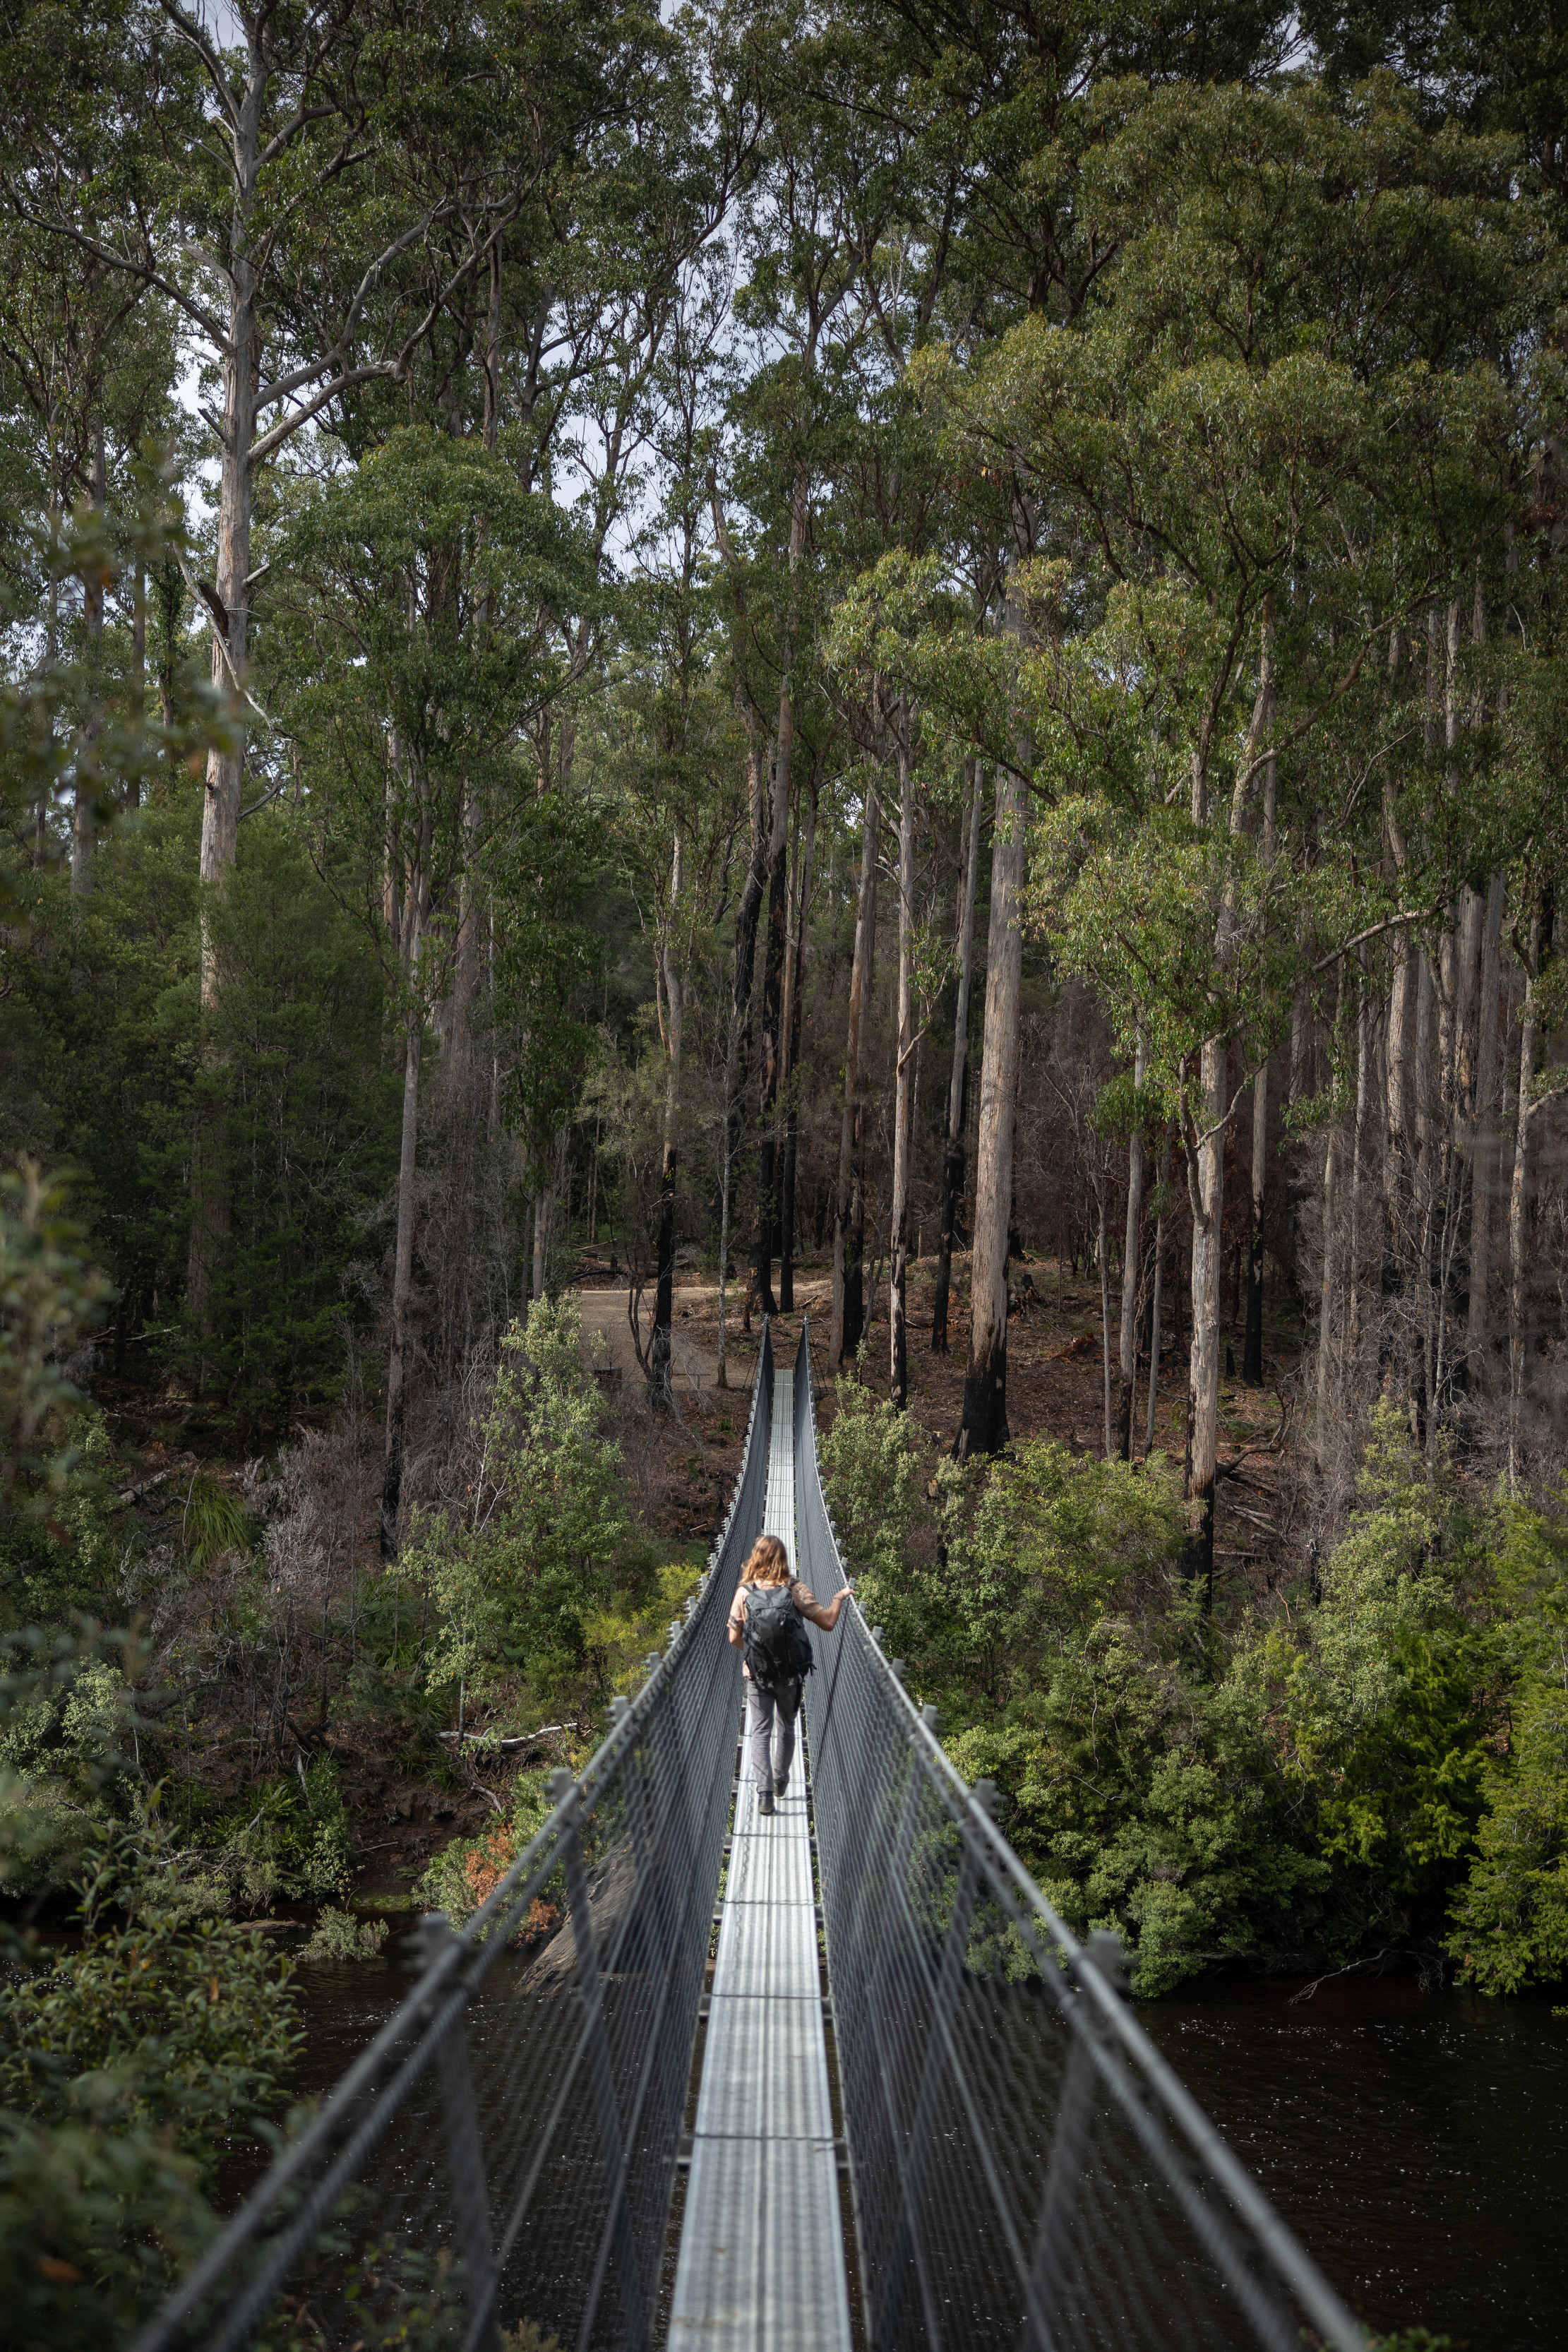 Wide angle image of a person walking along the Swinging Bridges, Tahune Adventures, surrounded by lush forest.